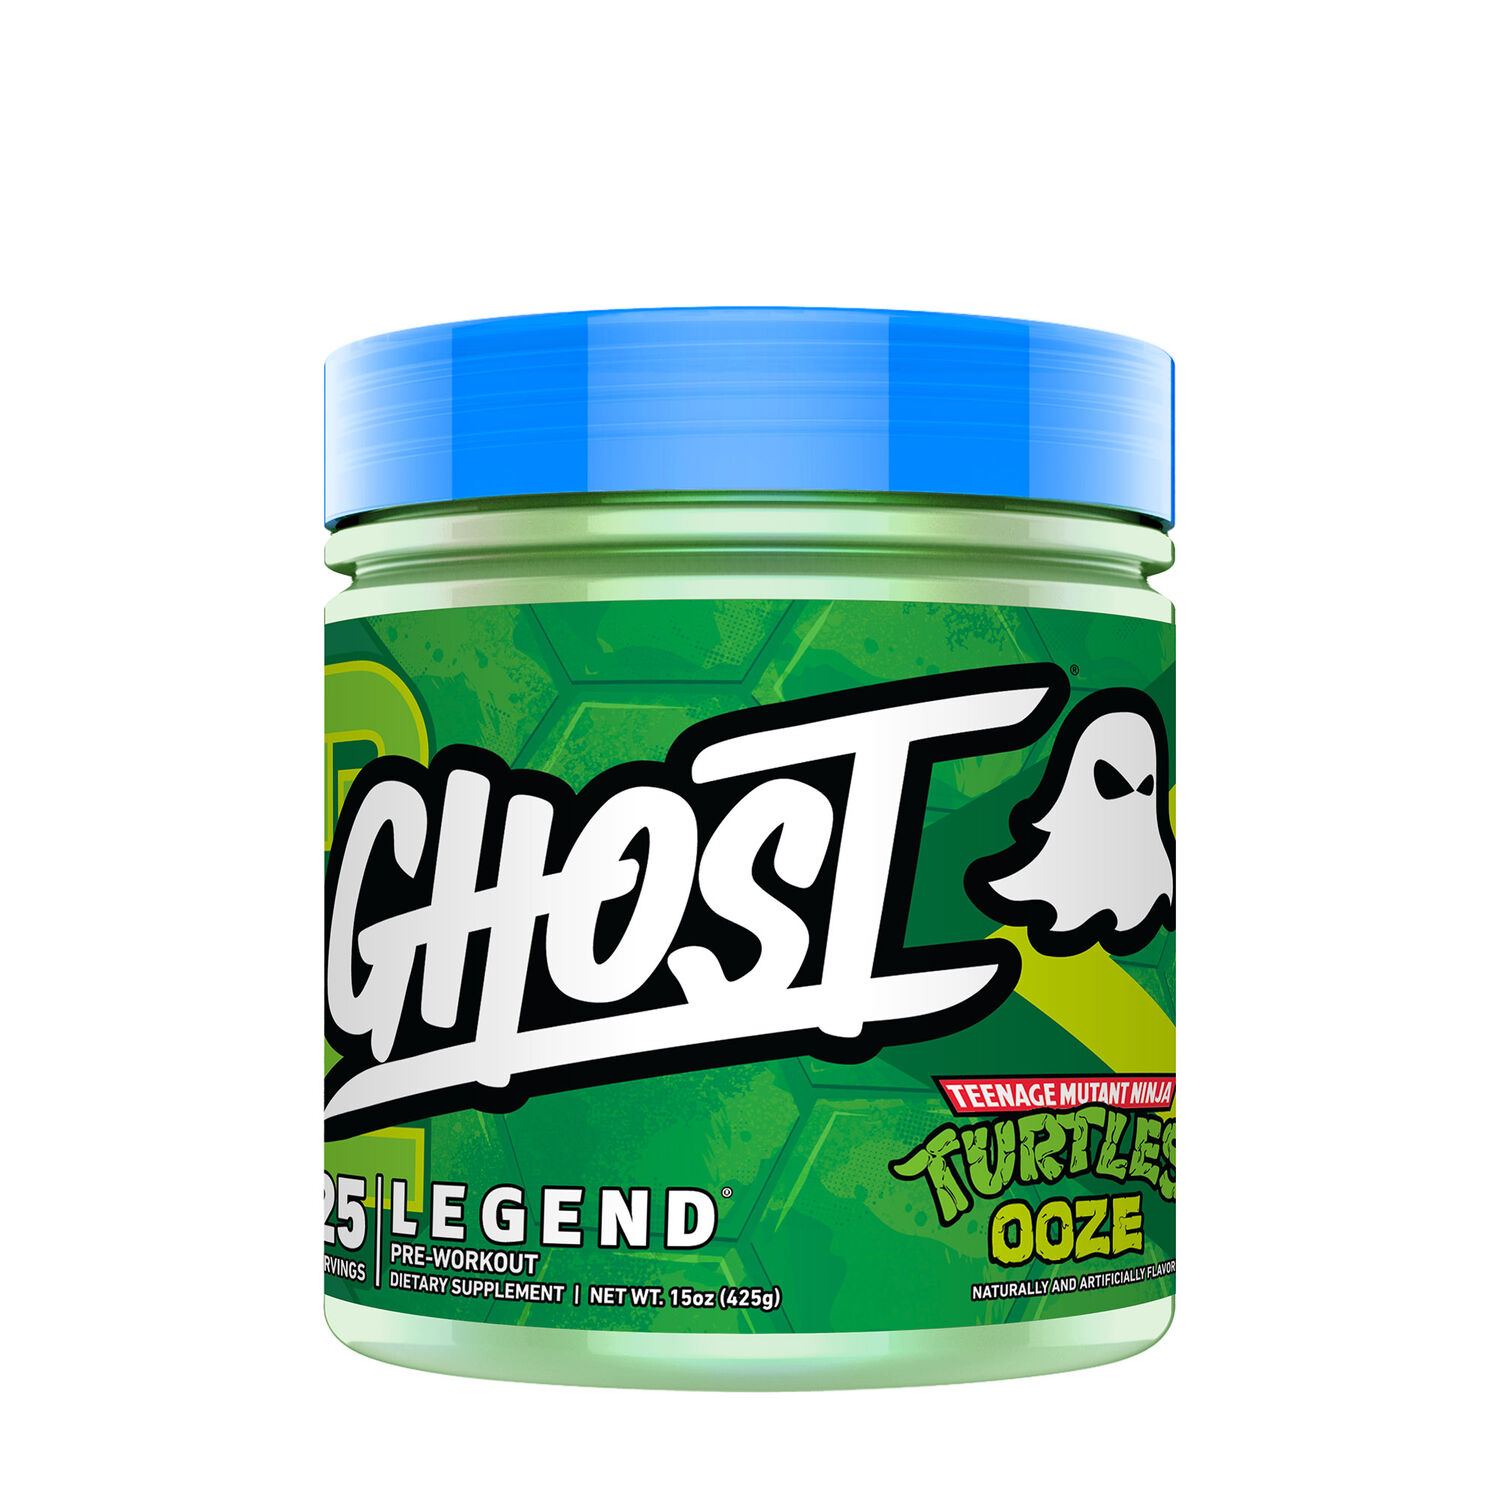 GHOST® LEGEND® V2 Pre-Workout X TNMT (TURTLE OOZE)